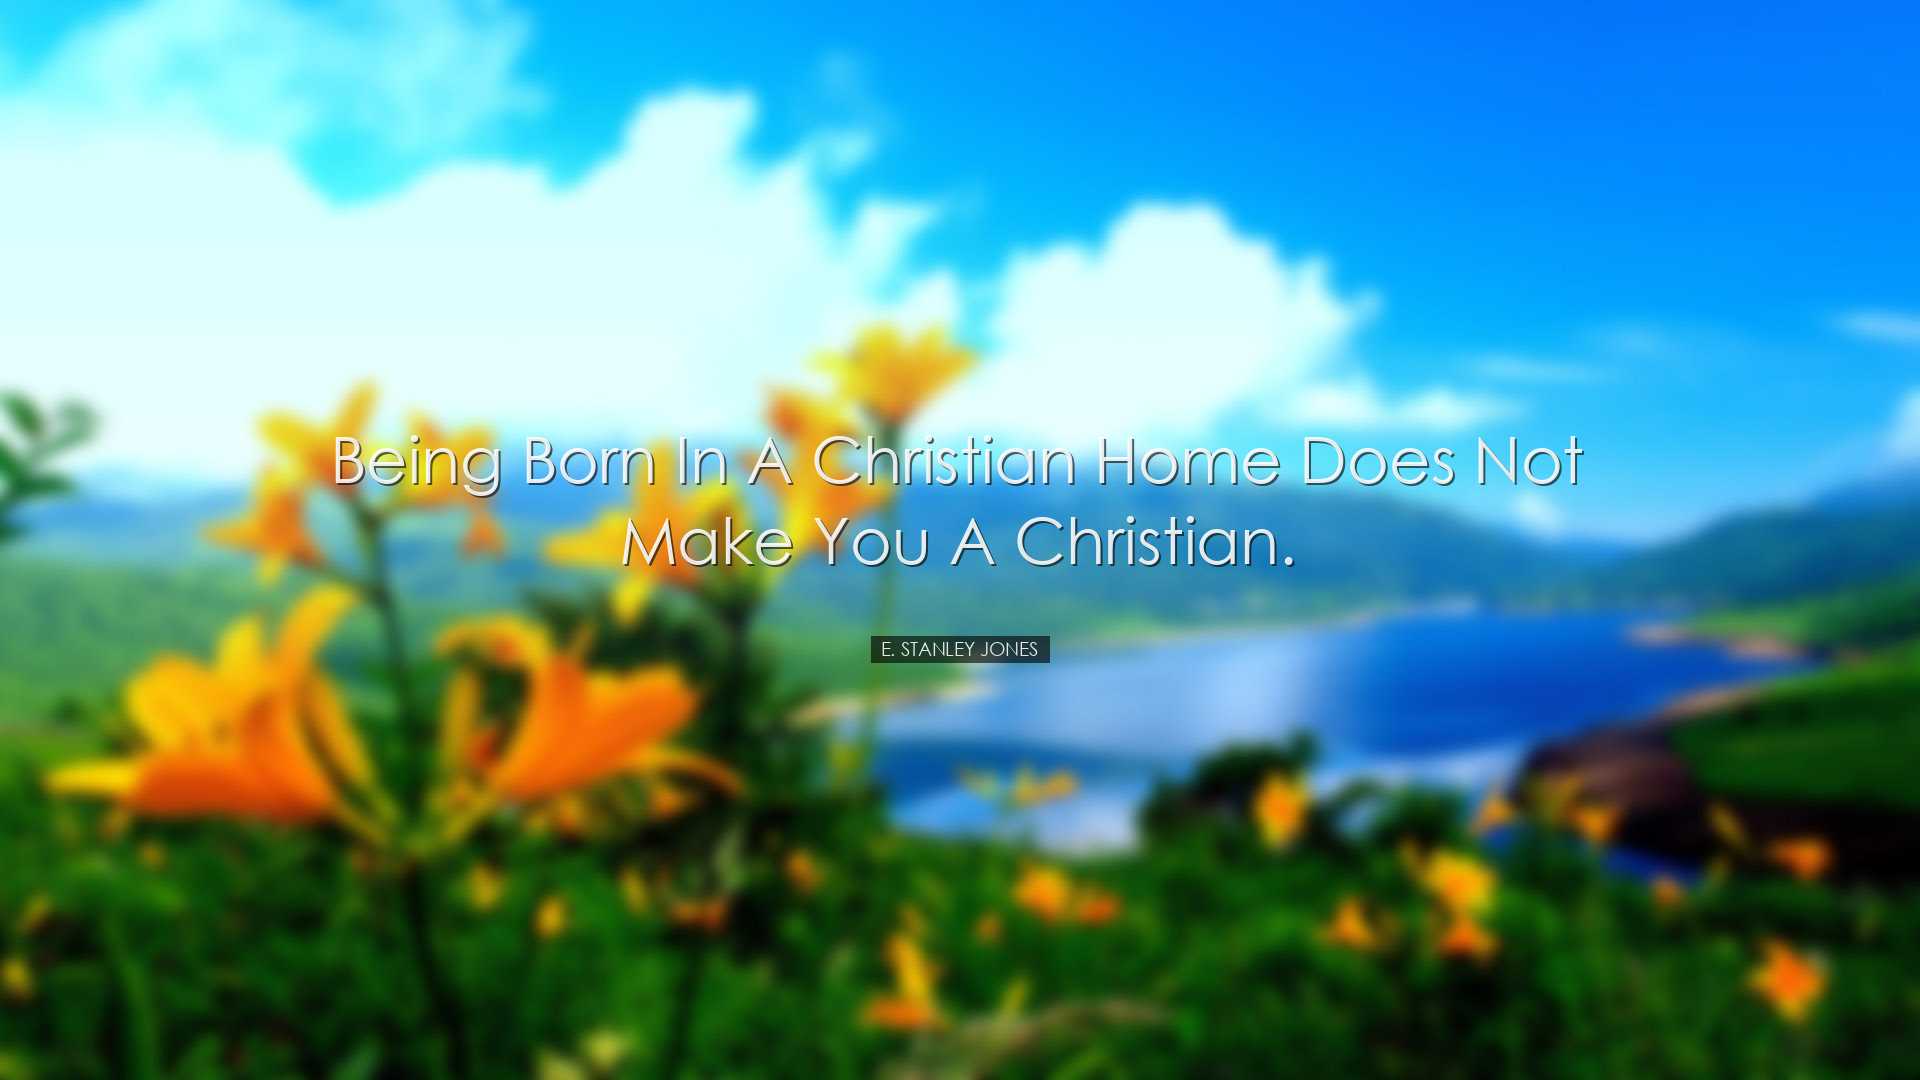 Being born in a Christian home does not make you a Christian. - E.